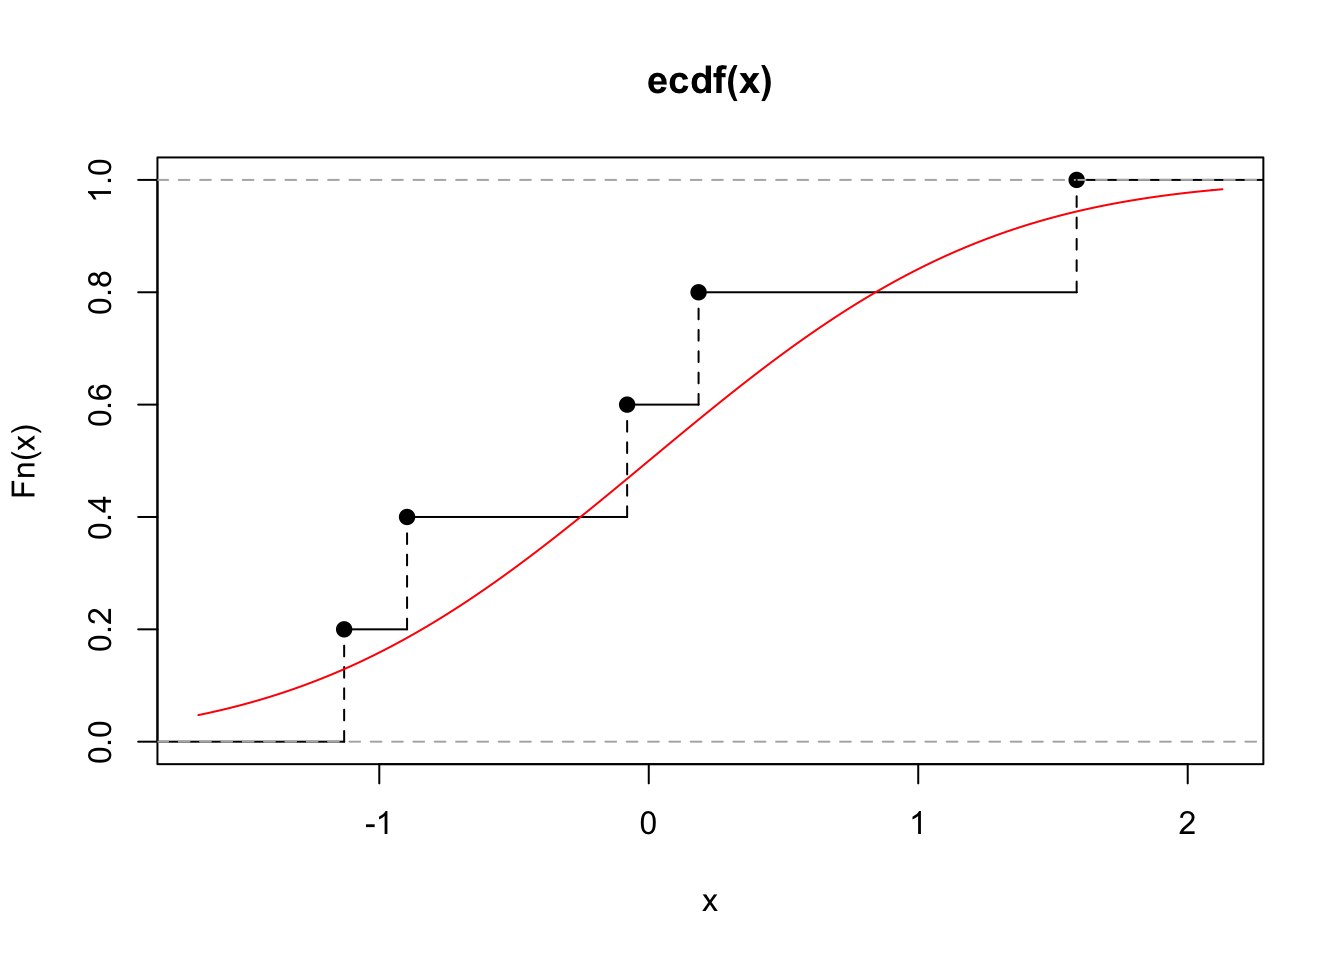 The ECDF for five observations drawn independently from a standard normal (black). The true distribution function for the standard normal is shown in red.